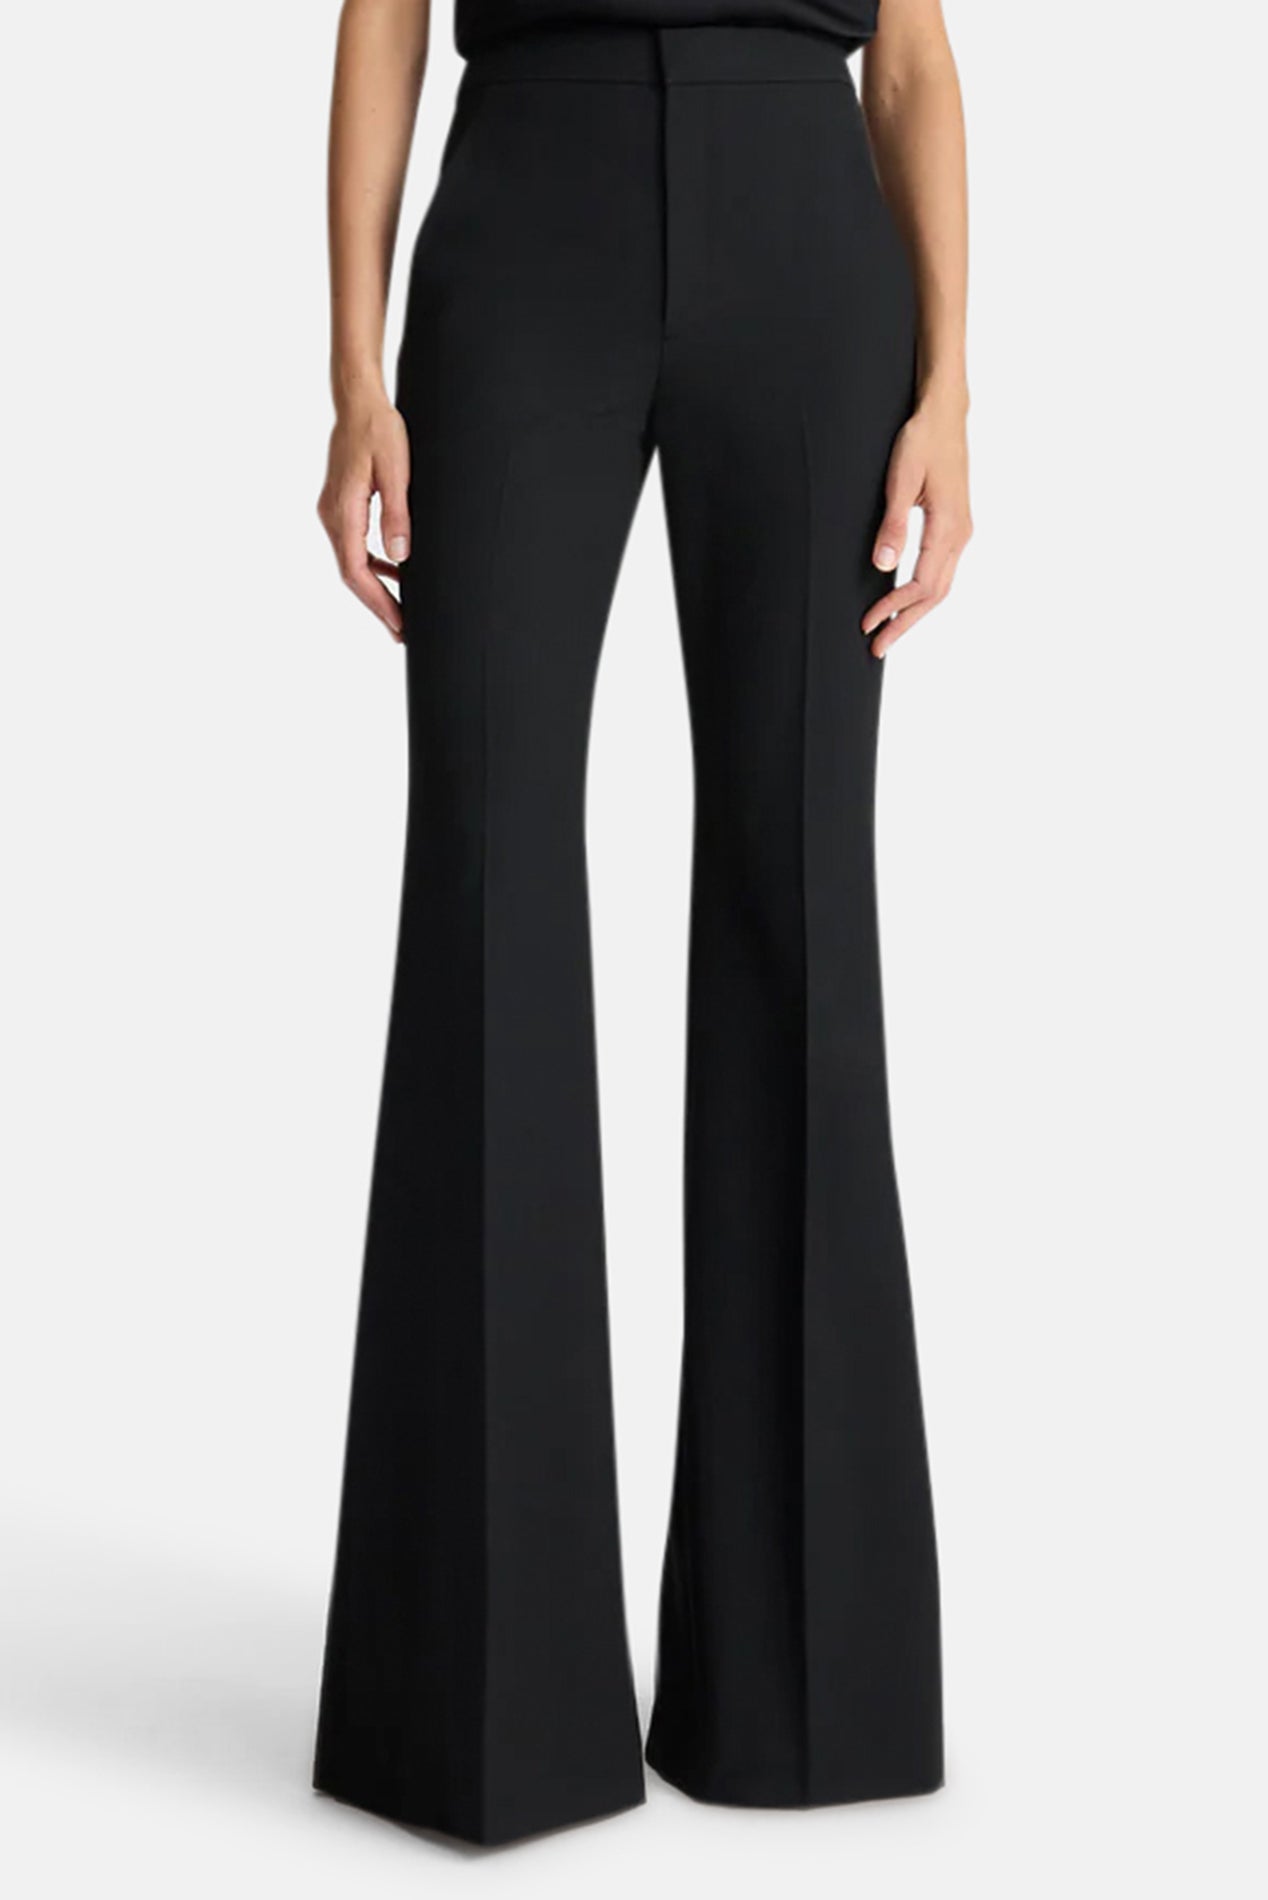 Asquith London Black Flared Pants